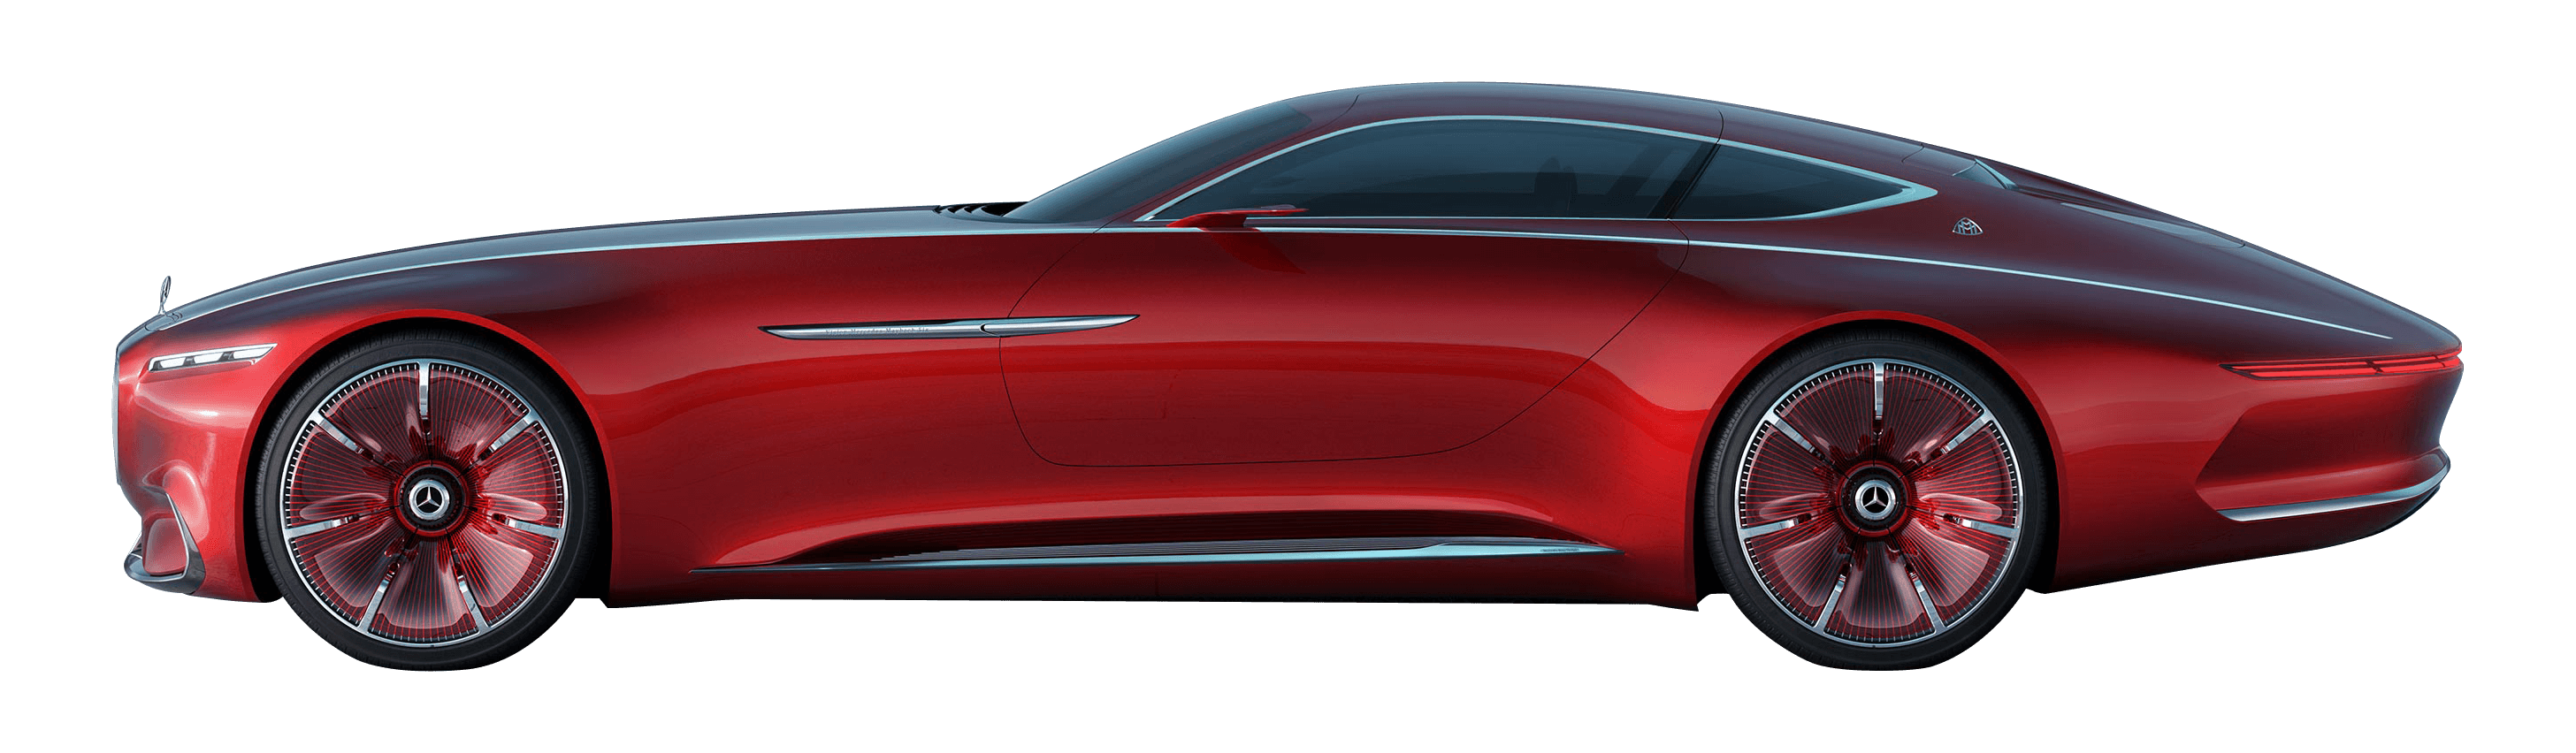 Red Concept Car PNG HD Quality